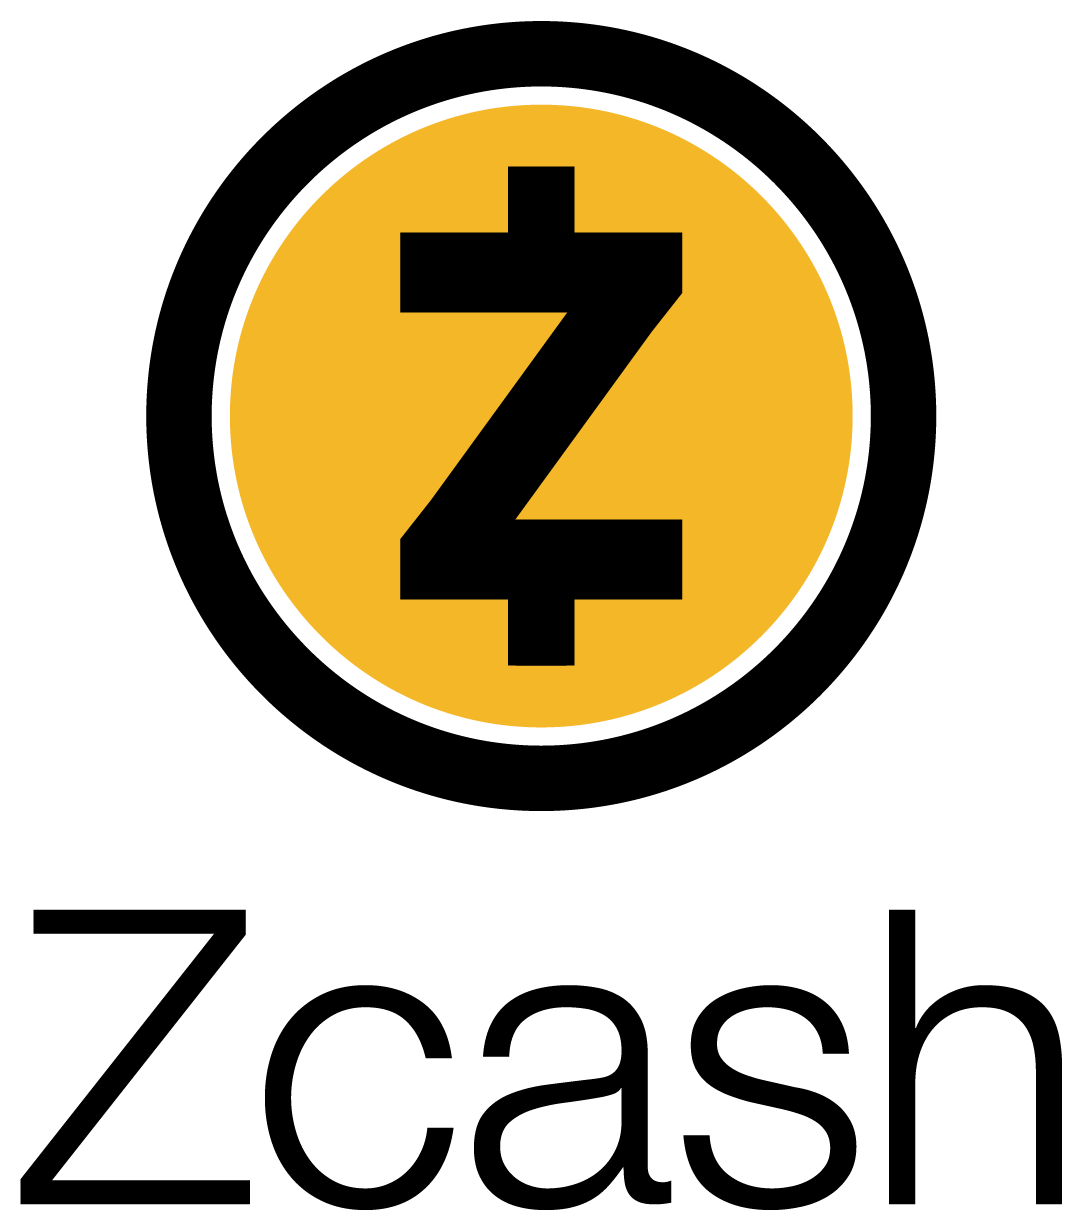 Bringing together ZCash users and enthusiasts across Africa for promotion of financial freedom & privacy of all.
@ZcashFoundation
@bolaigeaefe
@ElectricCoinCo